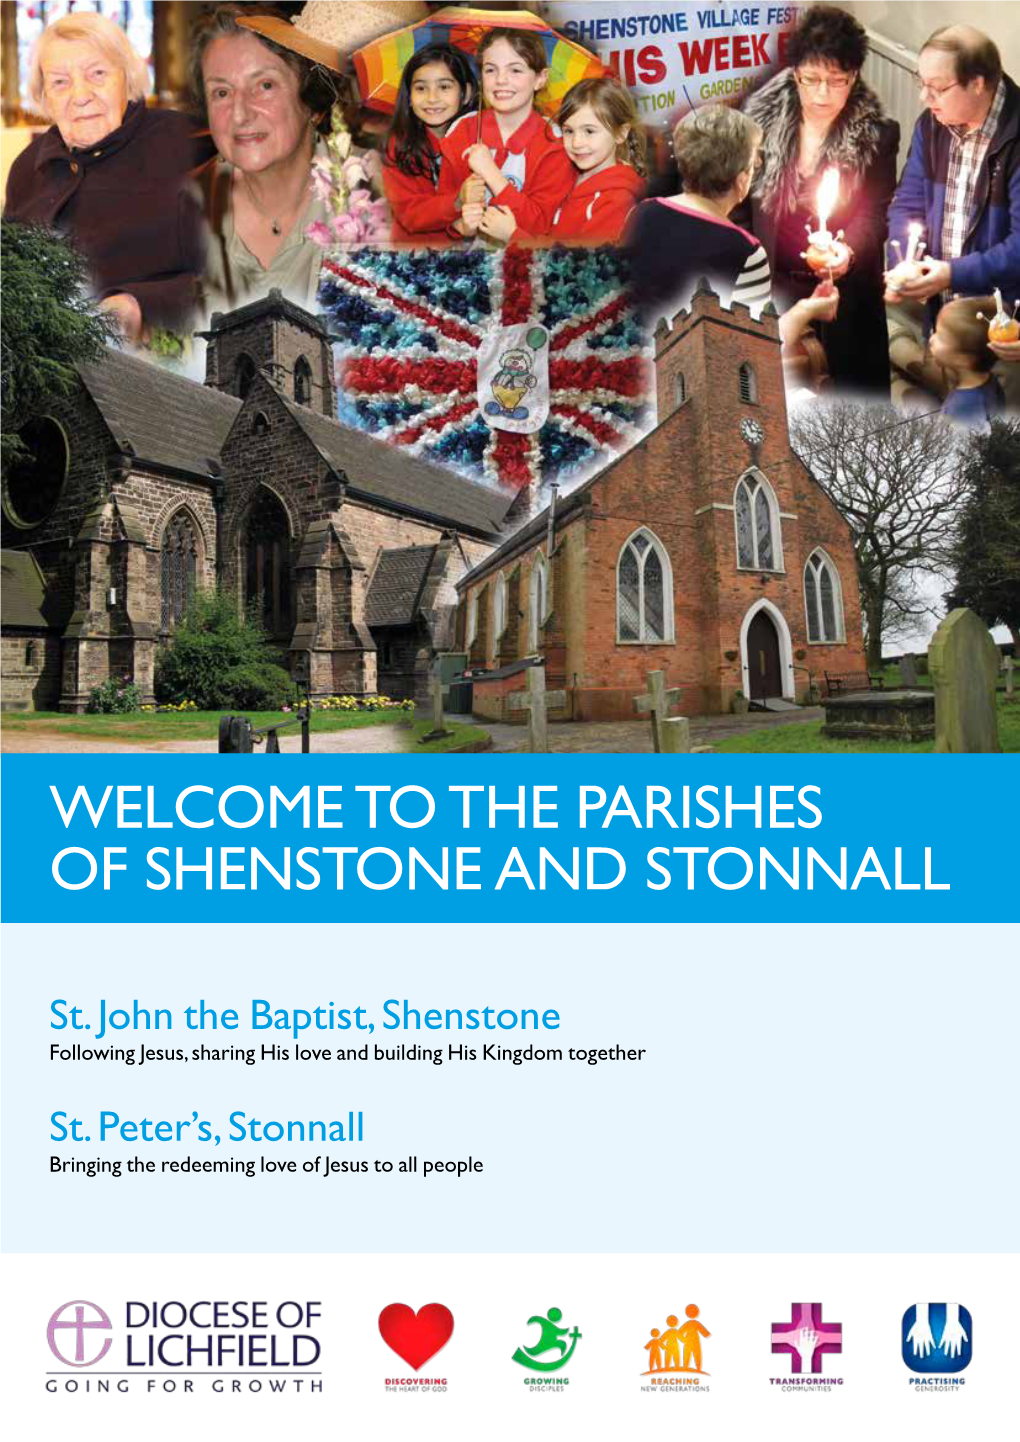 Welcome to the Parishes of Shenstone and Stonnall